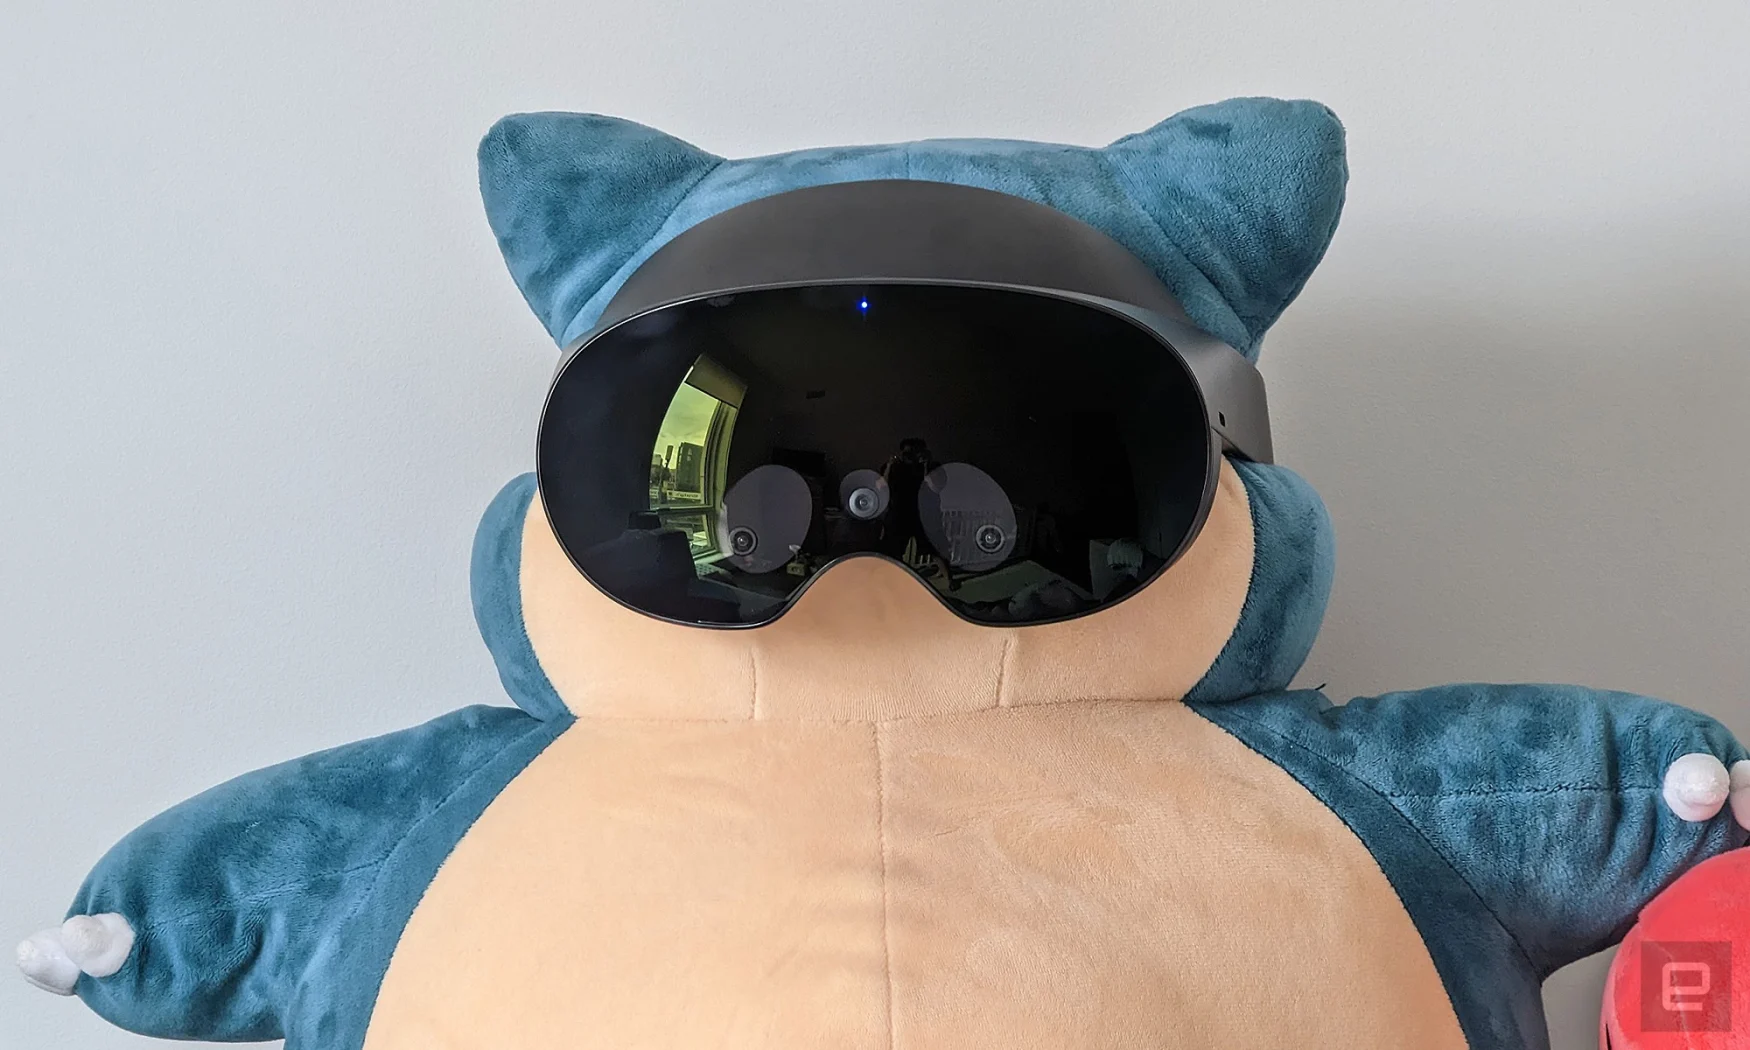 The Quest Pro's interior sensors are use to track face and eye movements to support features like foveated rendering and expressions for VR avatars. 